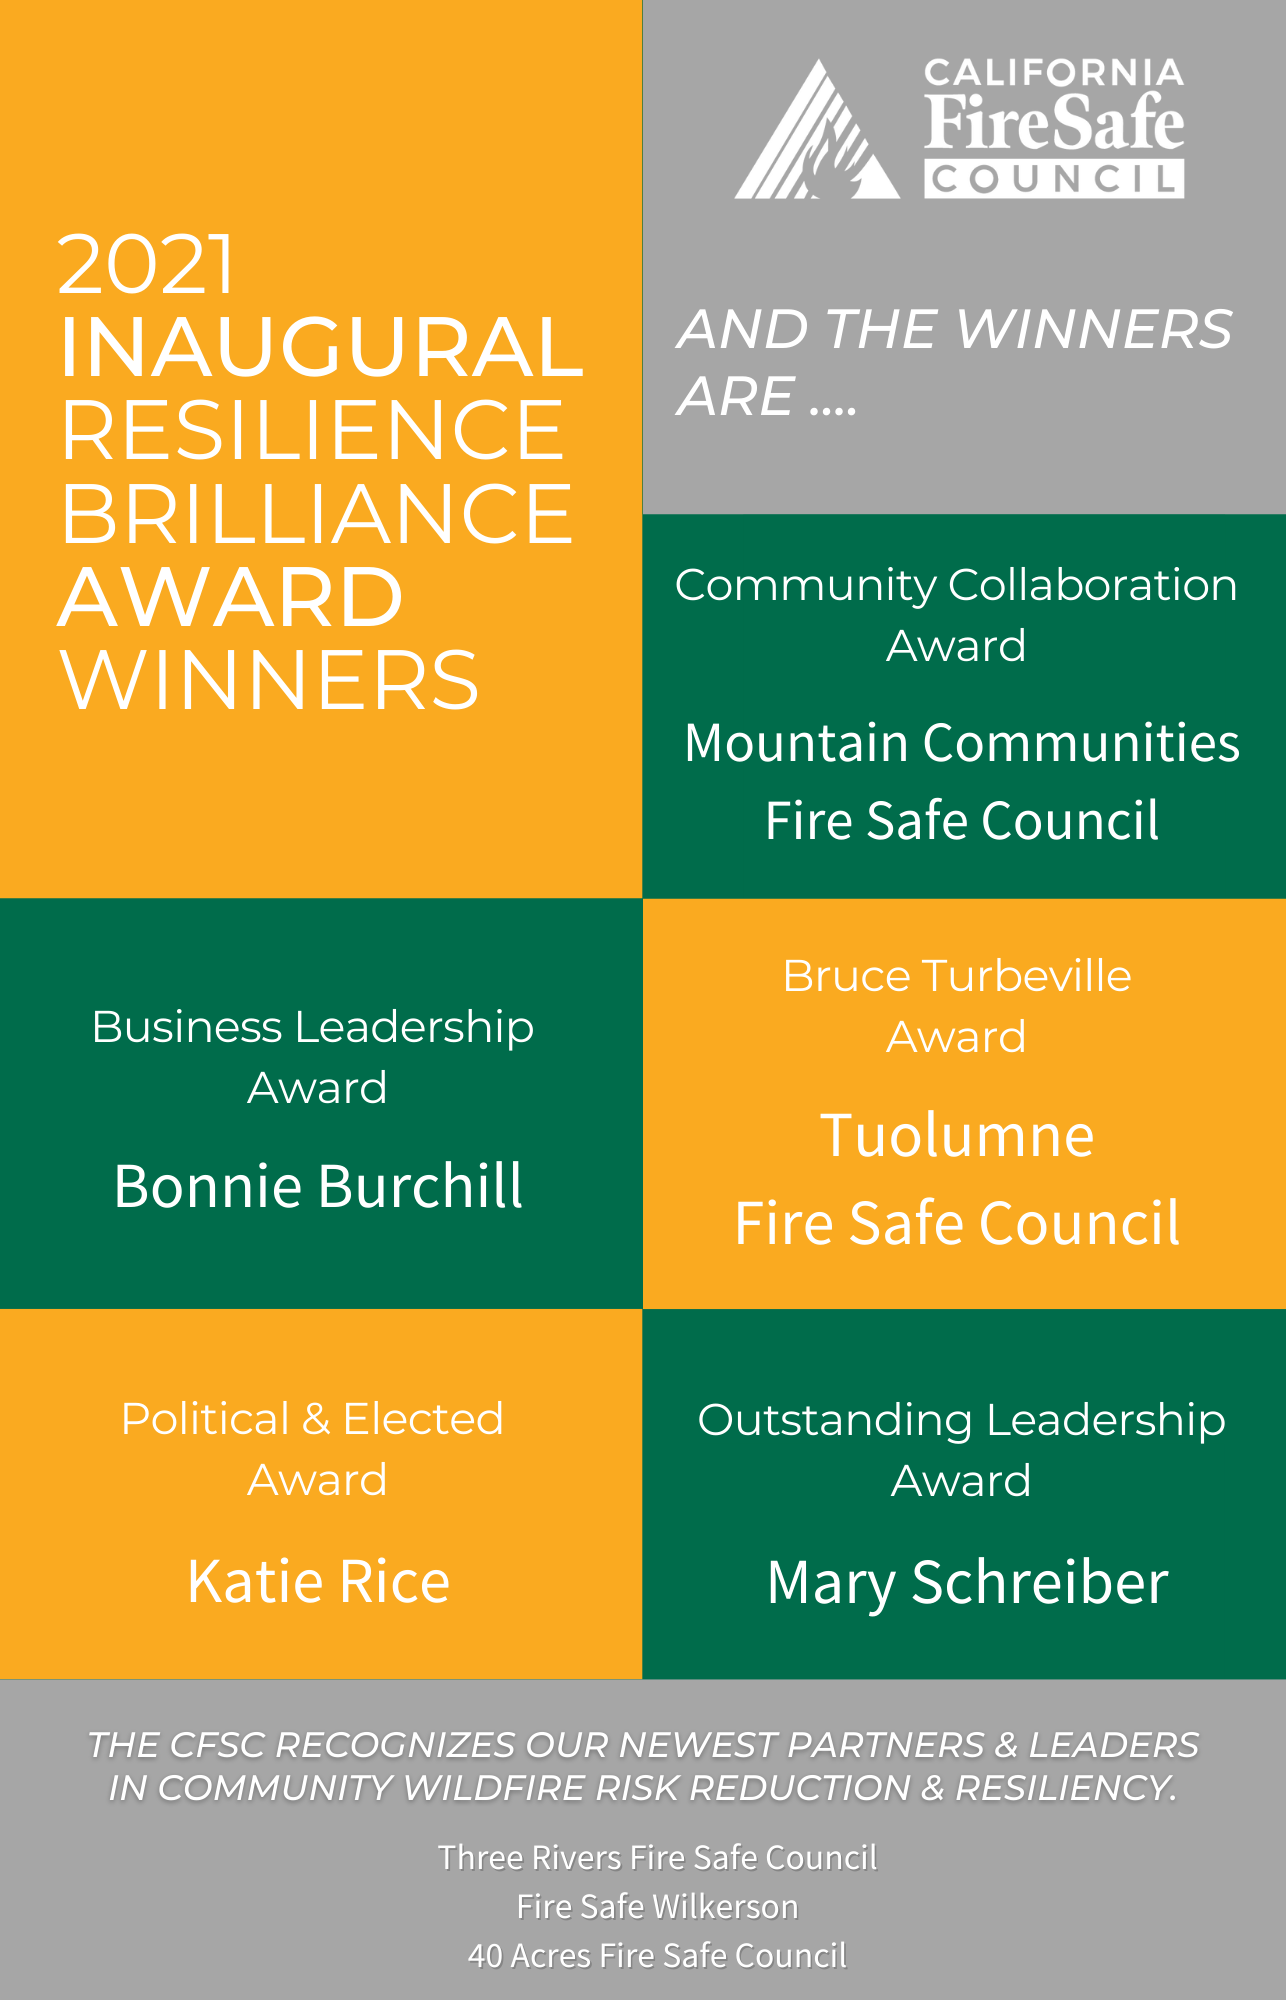 2021 Annual Inaugural Resilience Brilliance Award Winners graphic